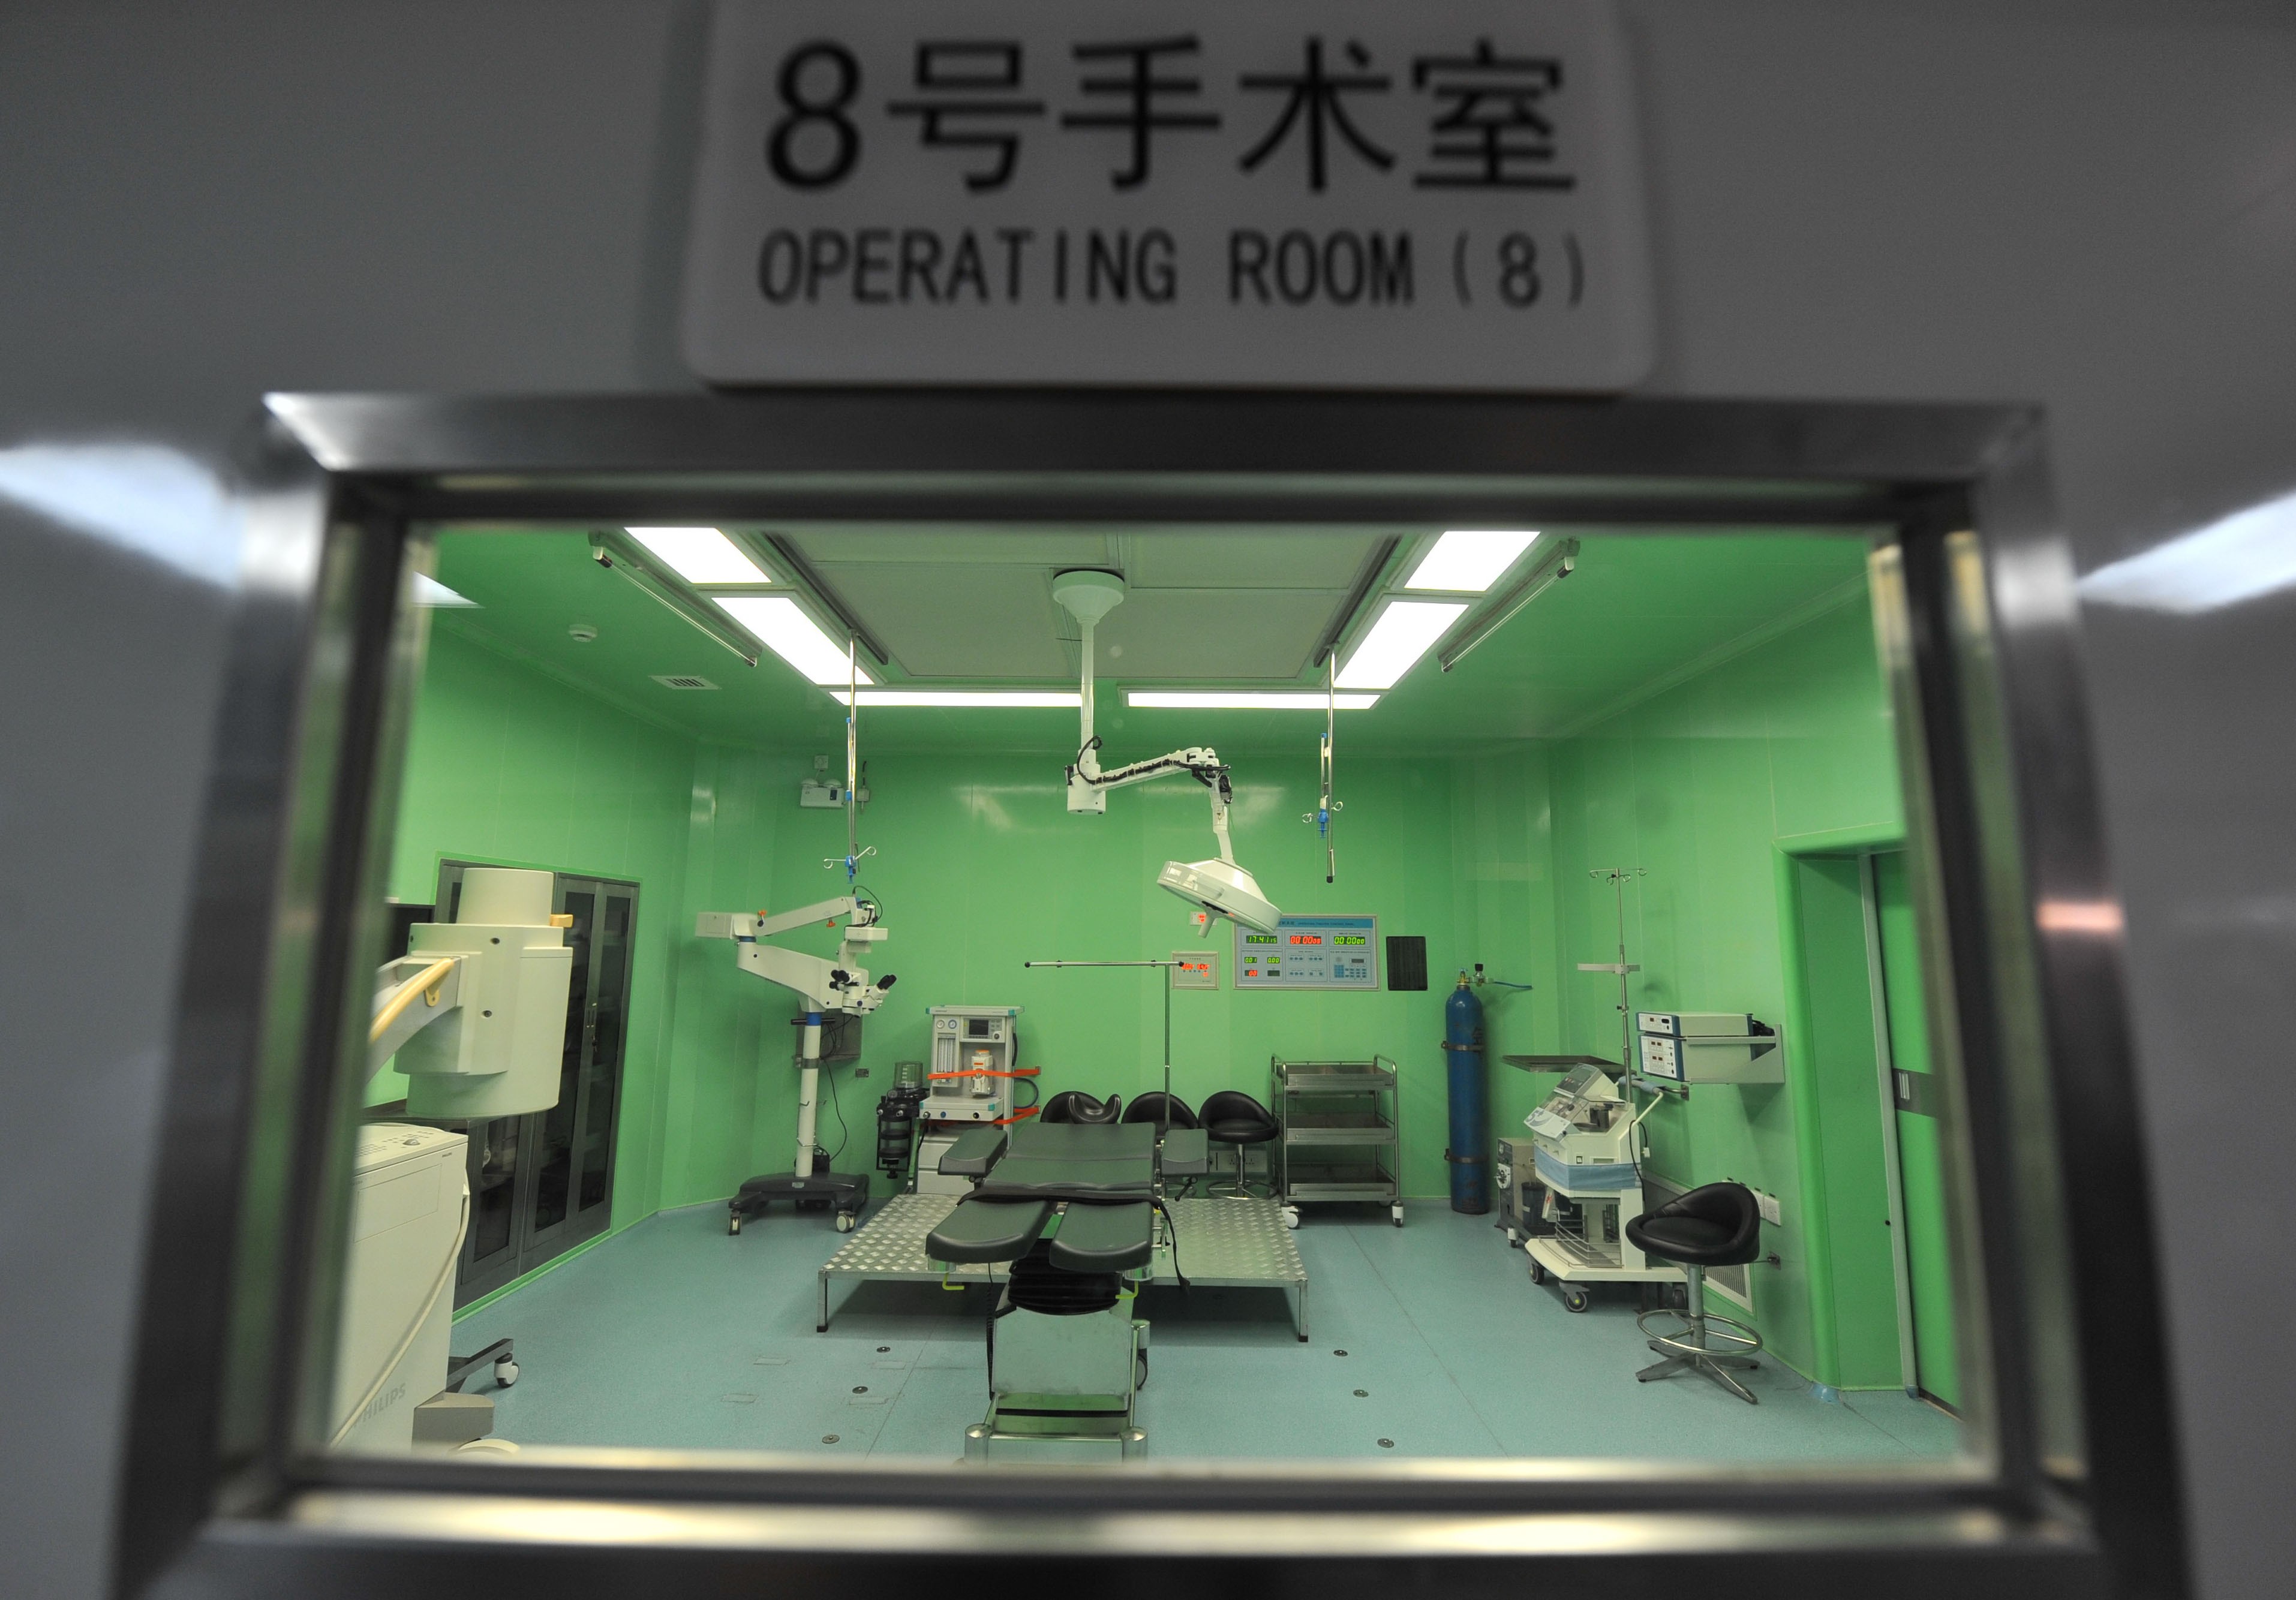 A doctor in northeastern China has been accused of asking a woman patient for more money while she was undergoing surgery. Photo: China Foto Press